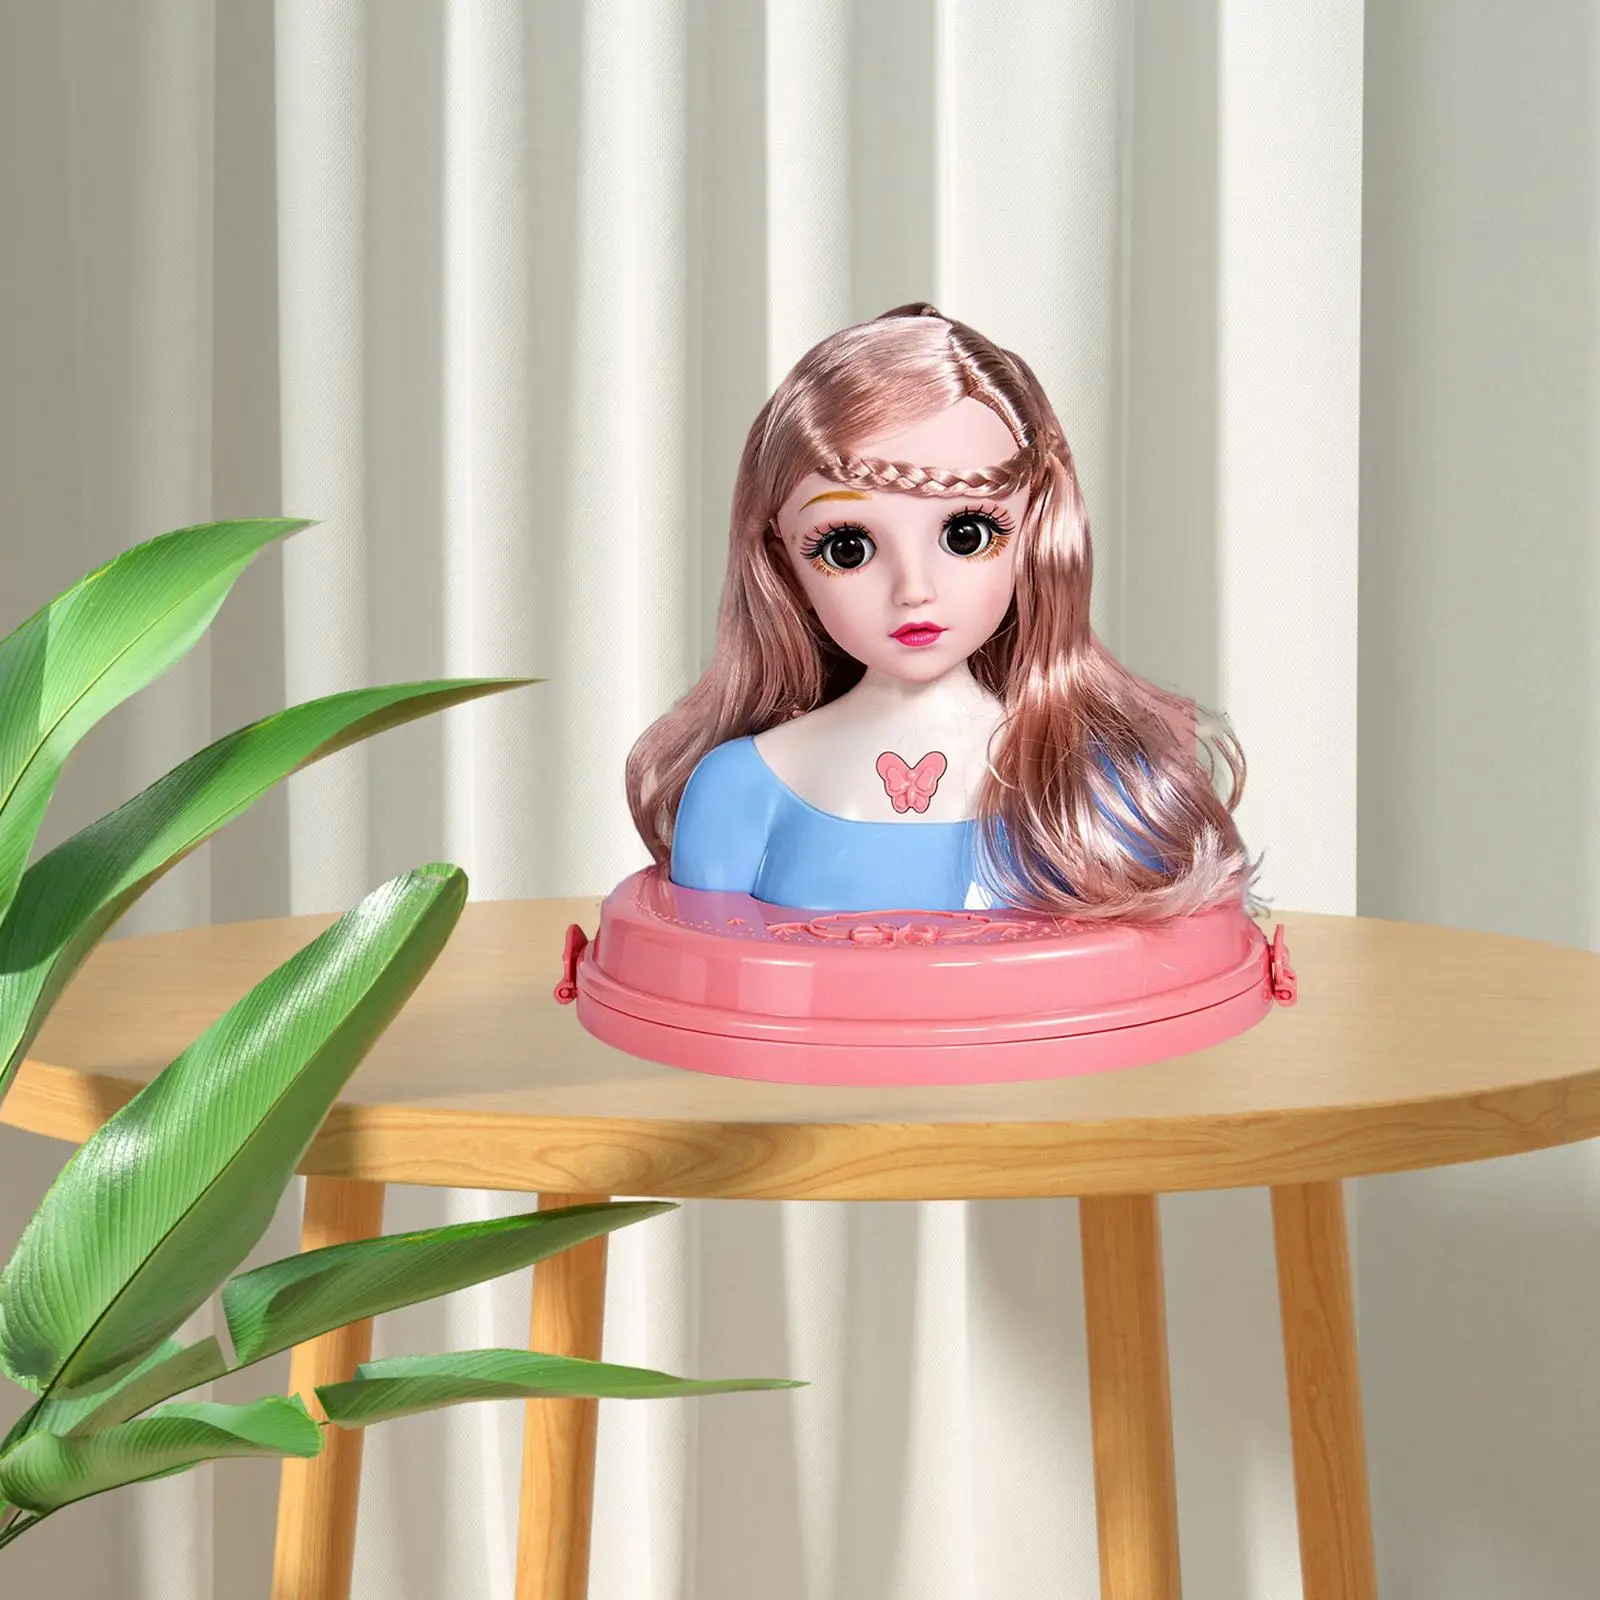 Doll Styling Head Toy Movable Eyelids Doll Hair Styling Toy Princess Doll for Adults Girls Children Kids Birthday Gifts